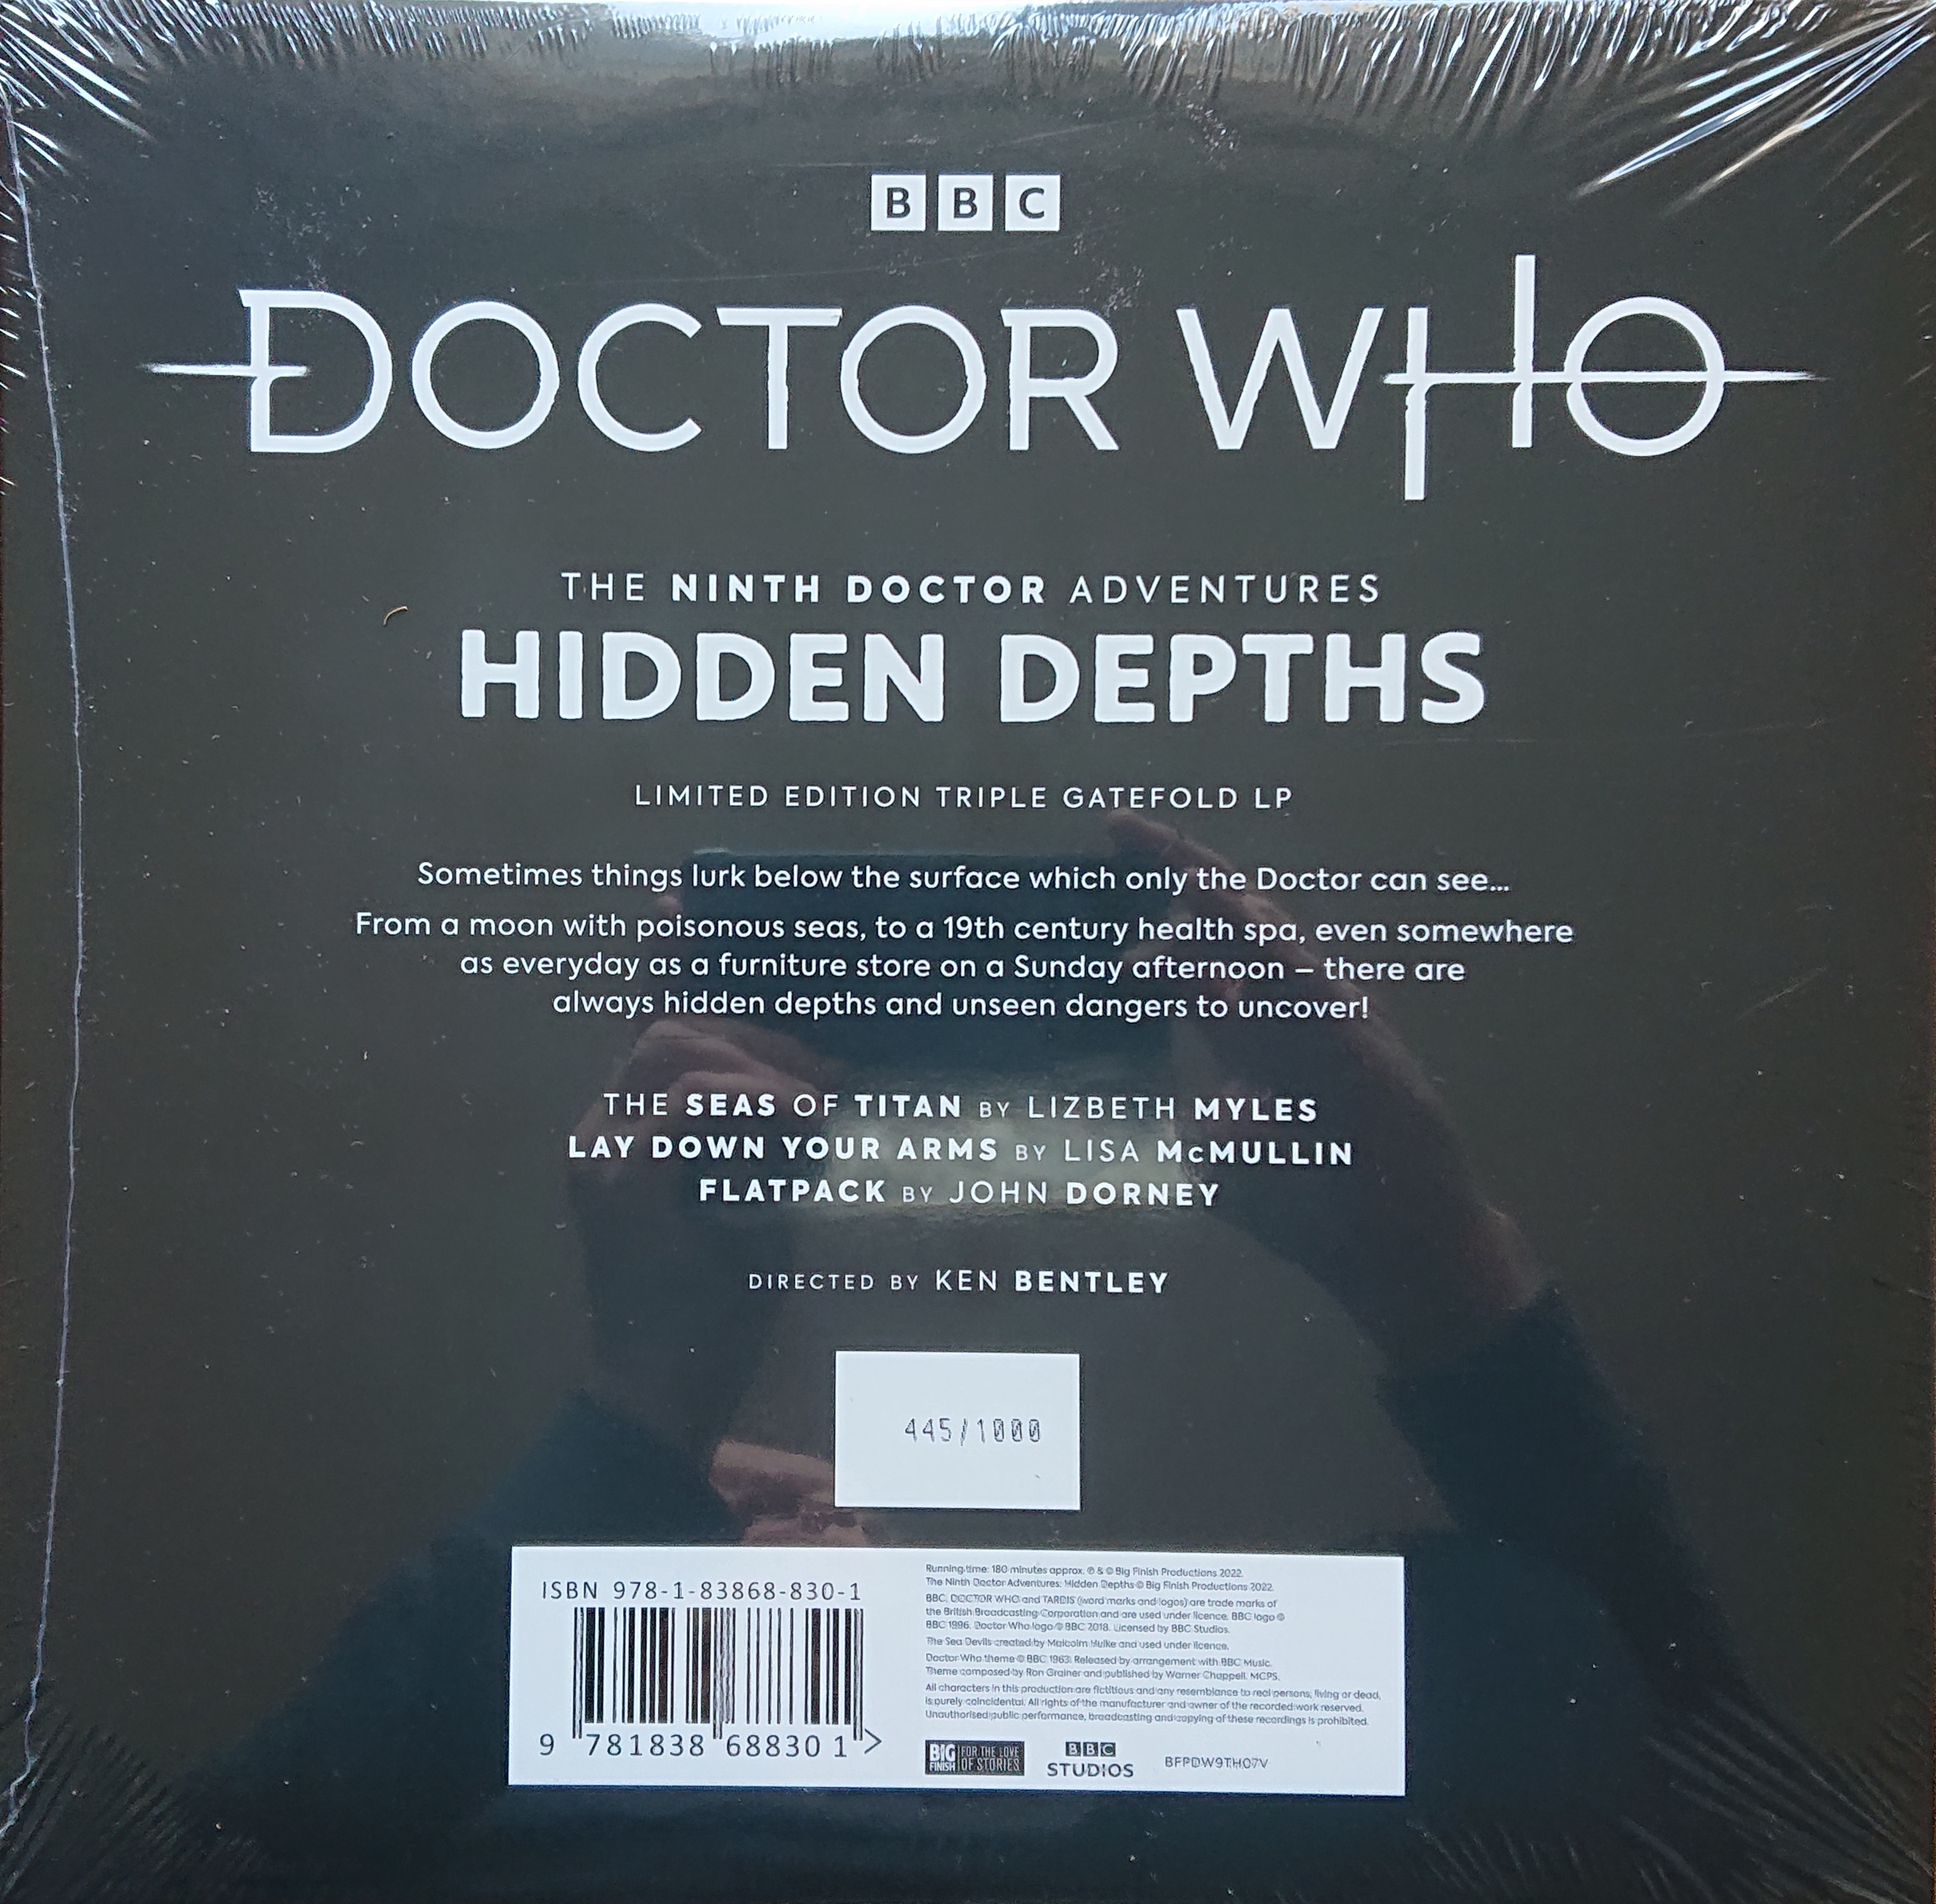 Picture of BFPDW9TH07V Doctor Who - The Ninth Doctor Adventures 2.3: Hidden depths by artist Lizbeth Myles / Lisa McMullin / John Dorney from the BBC records and Tapes library